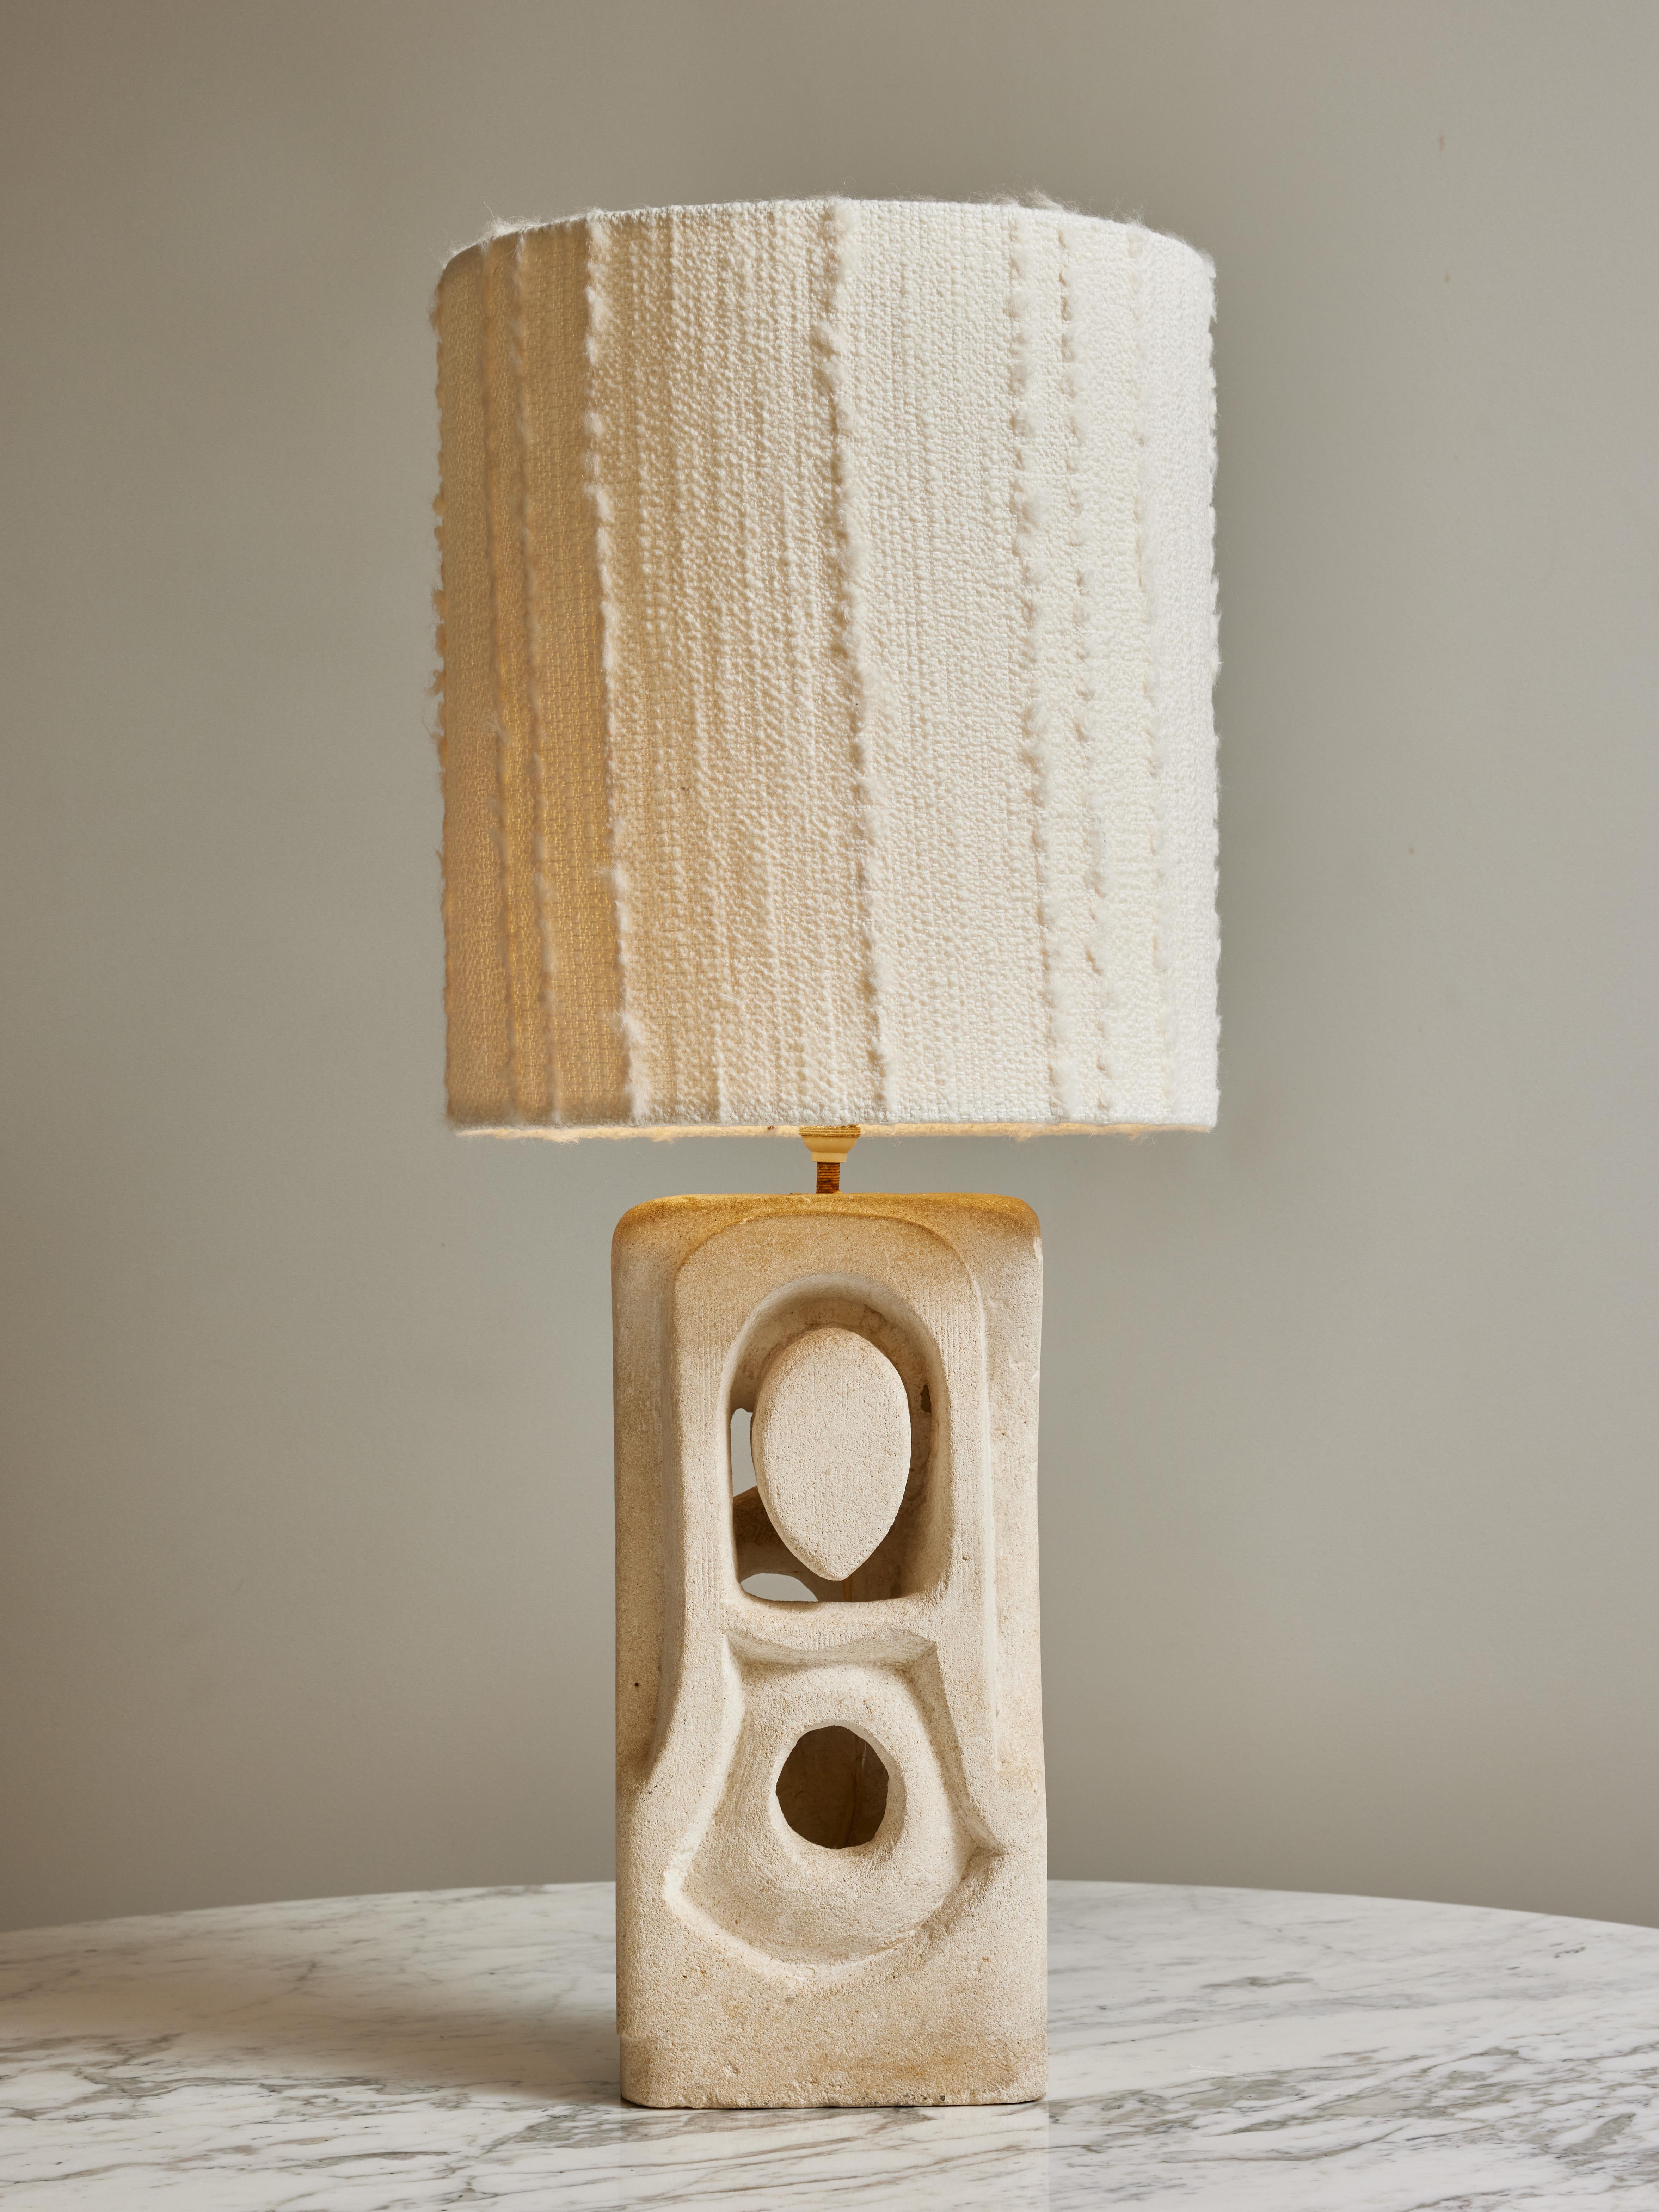 Sandstone table lamp made by the french artist Albert Tormos.
Rectangular shaped with soft angles and edges, this abstract work from Tormos could show a woman/nun figure.

Albert Tormos is a French sculptor painter and poet, known for his lamps and